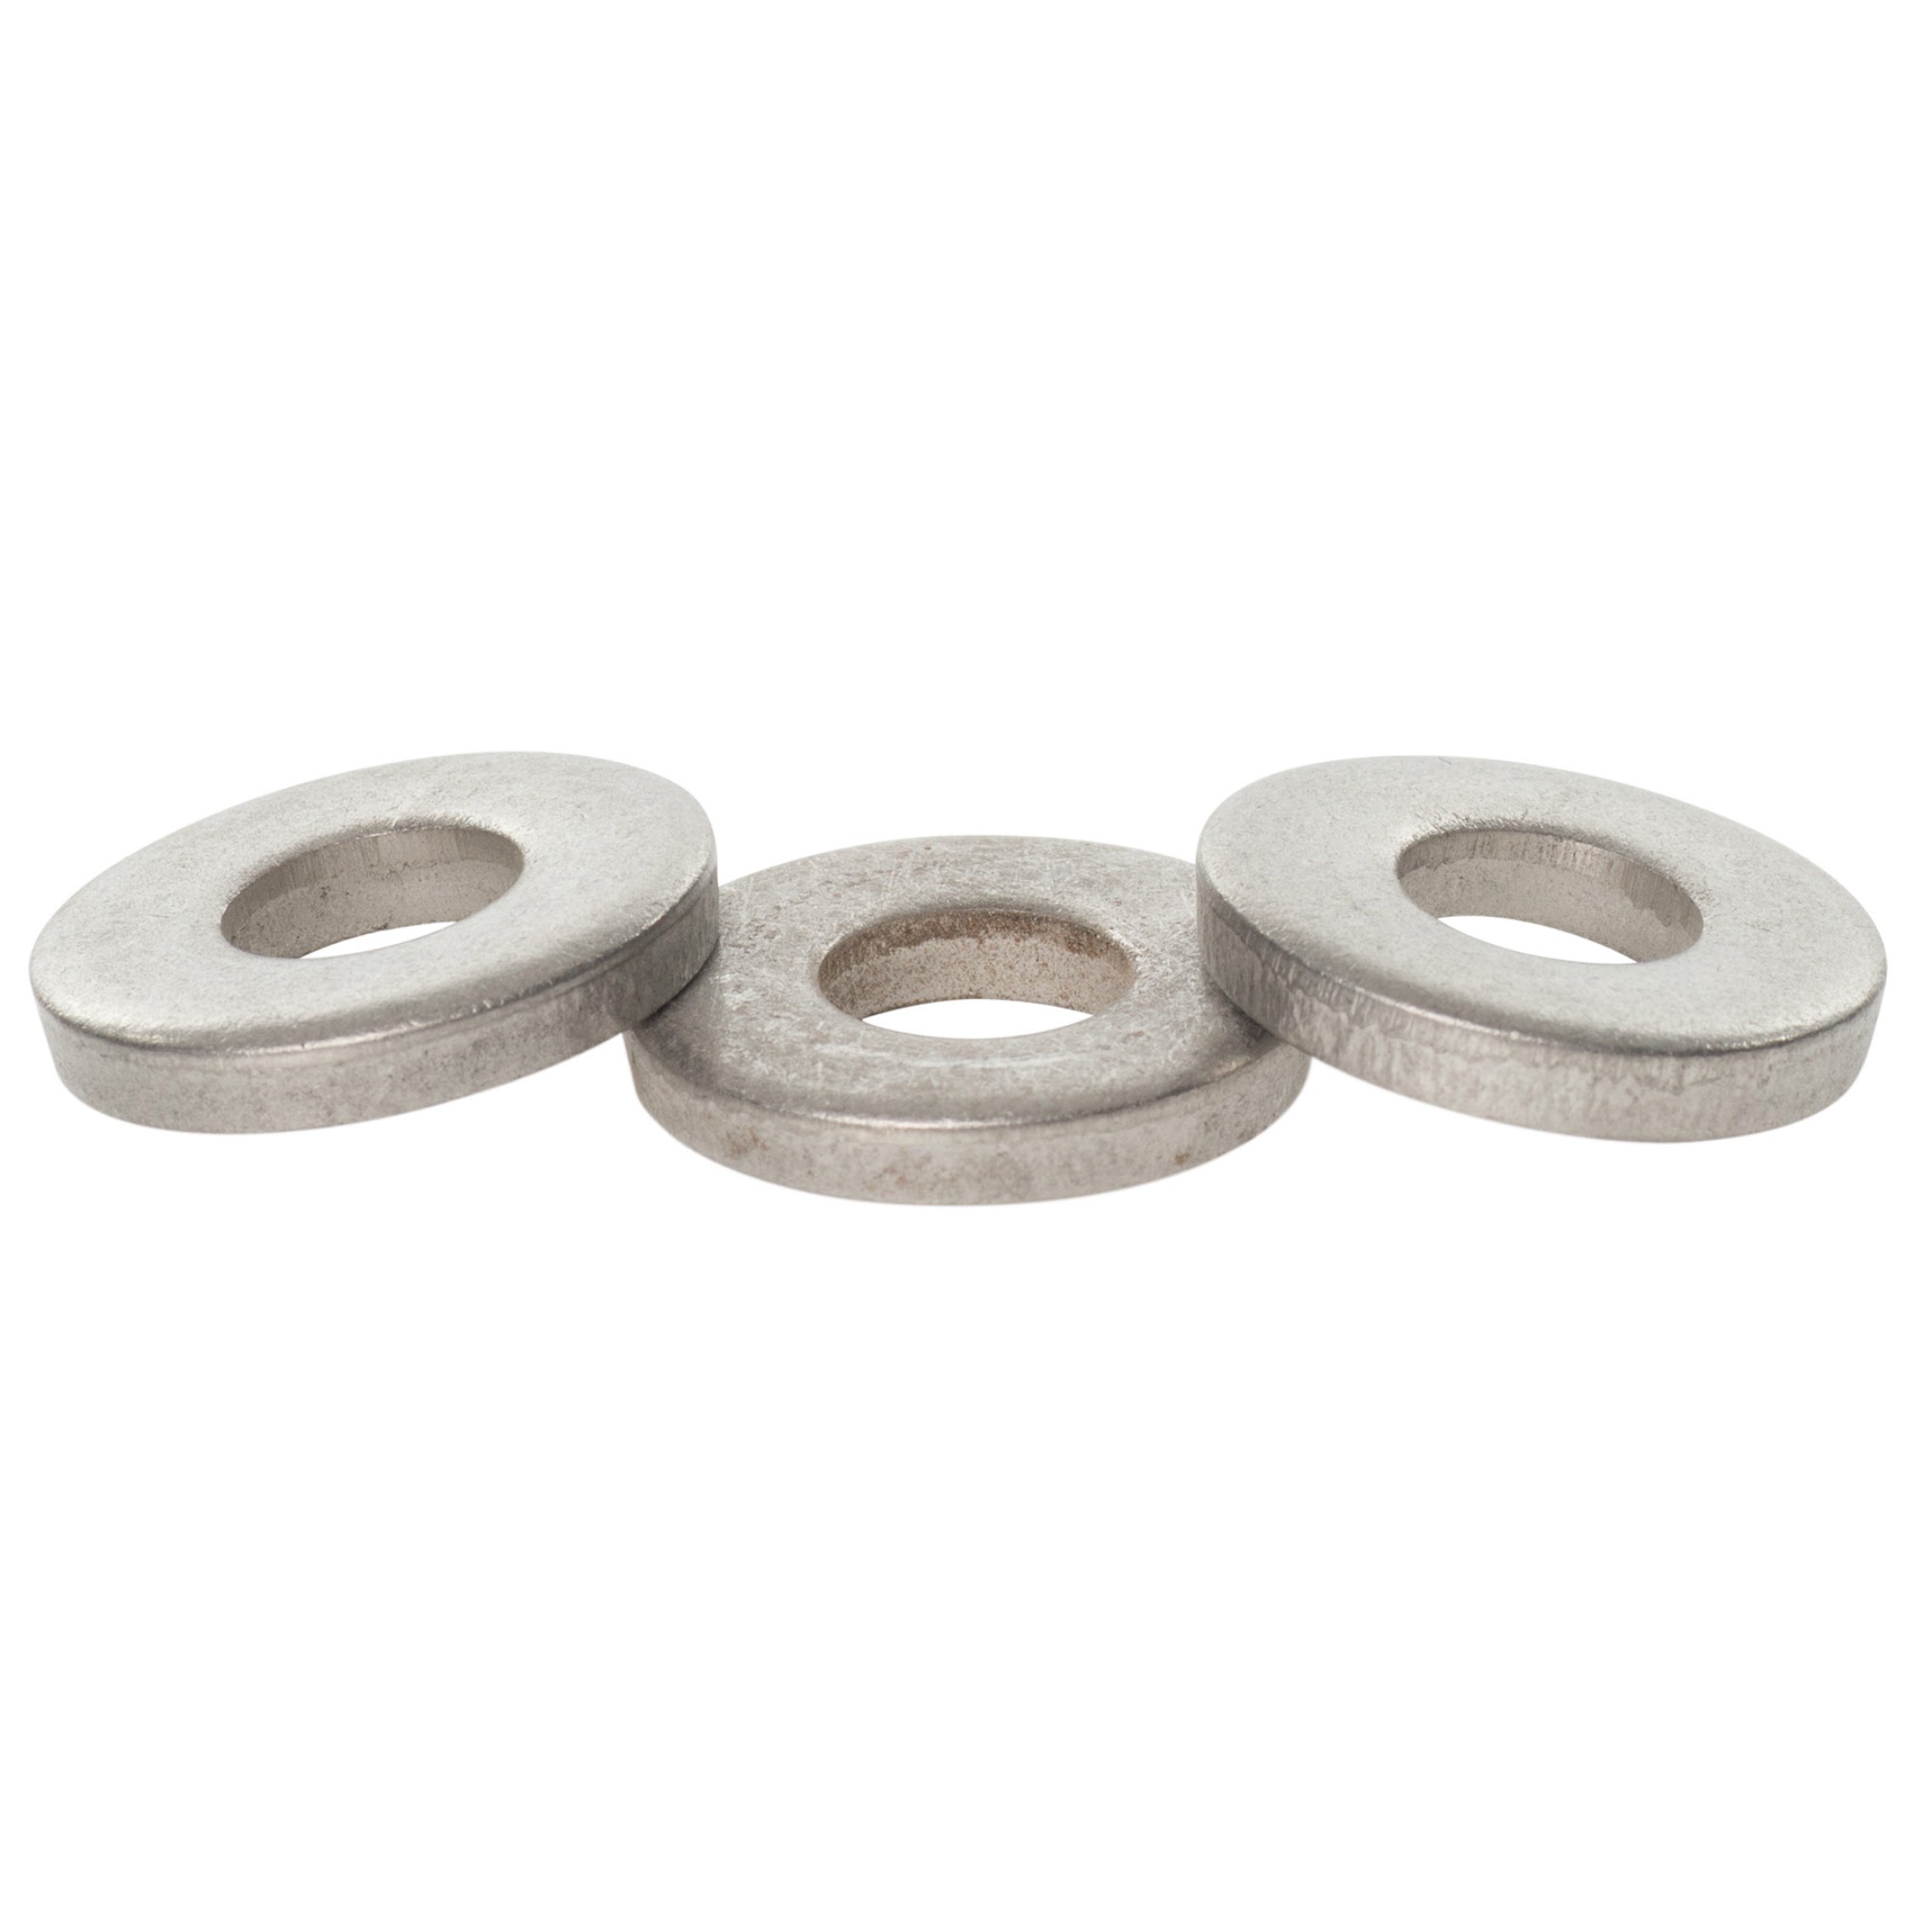 M1.6,M2,M3,M4,M5,M6 FLAT WASHERS A2 Stainless Steel Pack of 100